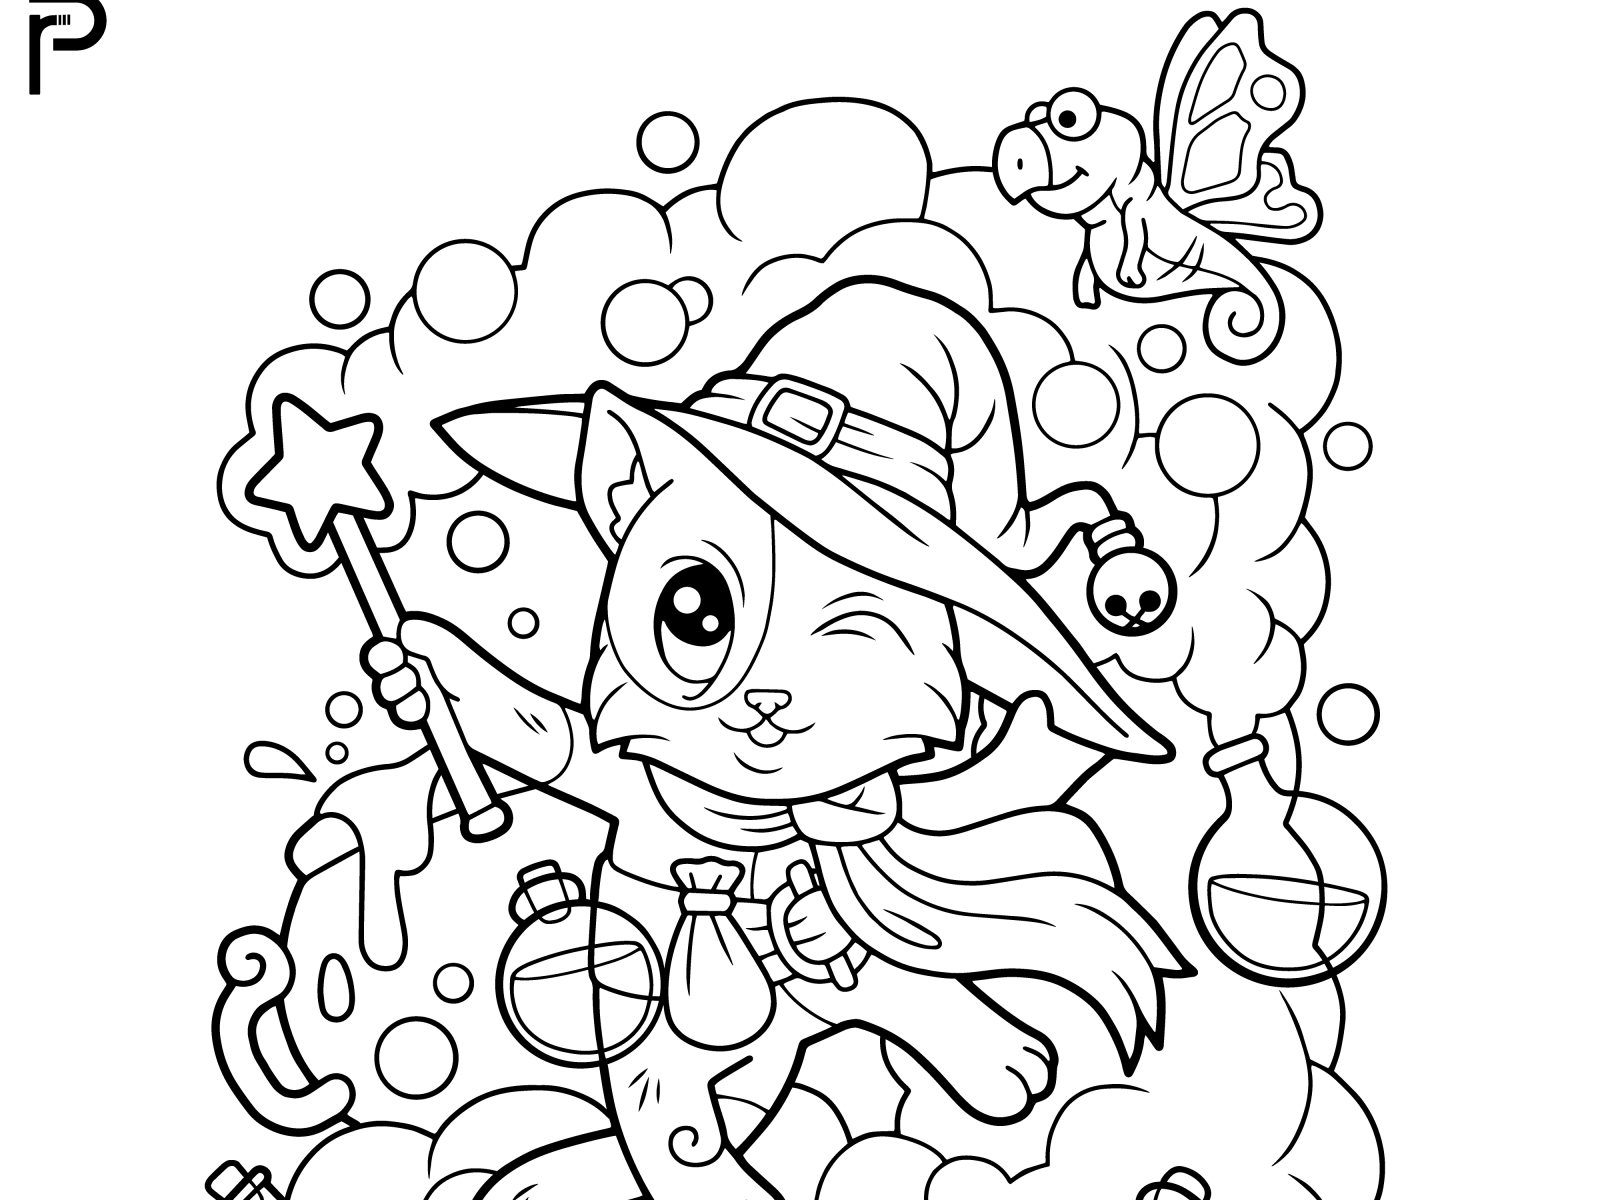 Coloring Book Page by razaphics on Dribbble